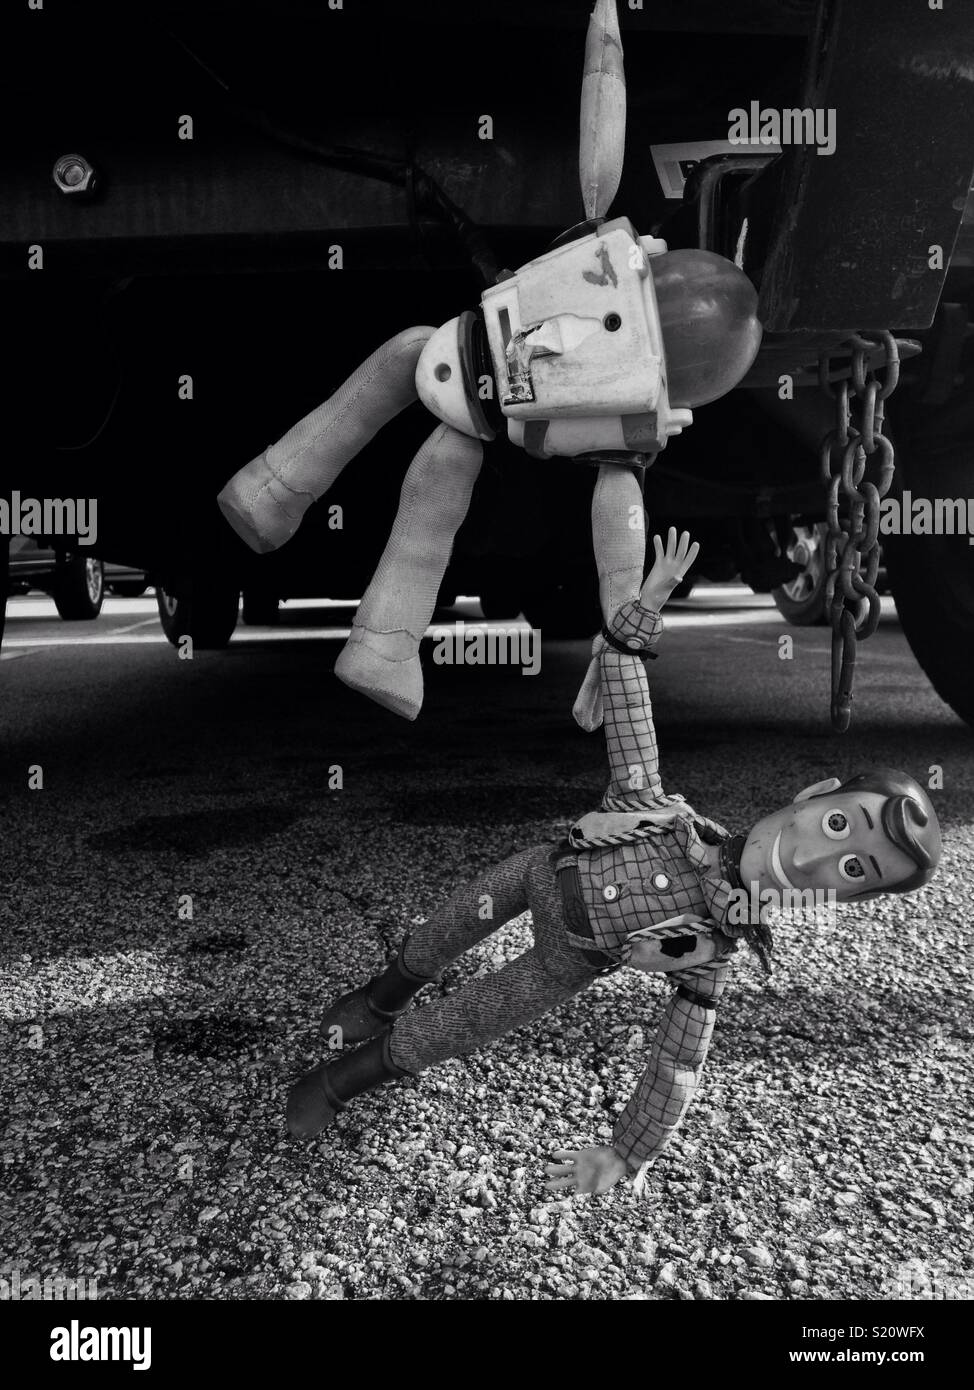 Black and white photo of Buzz Lightyear and Woody hanging from vehicle bumper in North Carolina parking lot Stock Photo